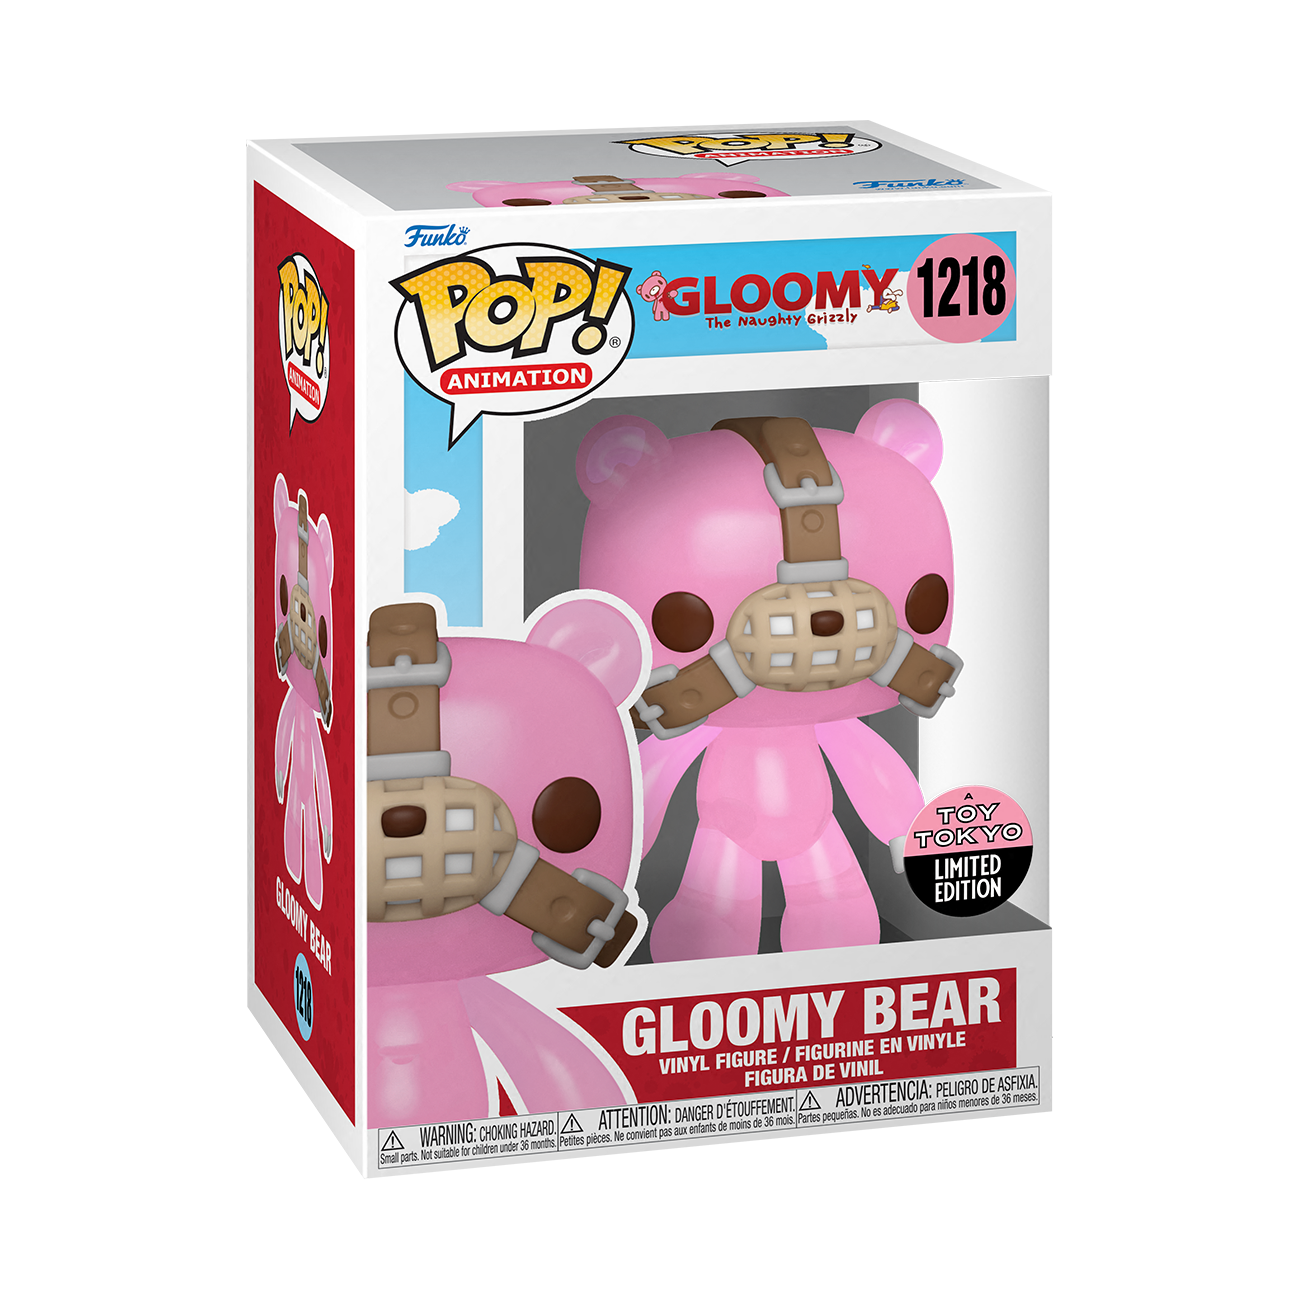 Funko Pop! Animation: The Naughty Grizzly Translucent Toy Tokyo - Gloomy Bear Official